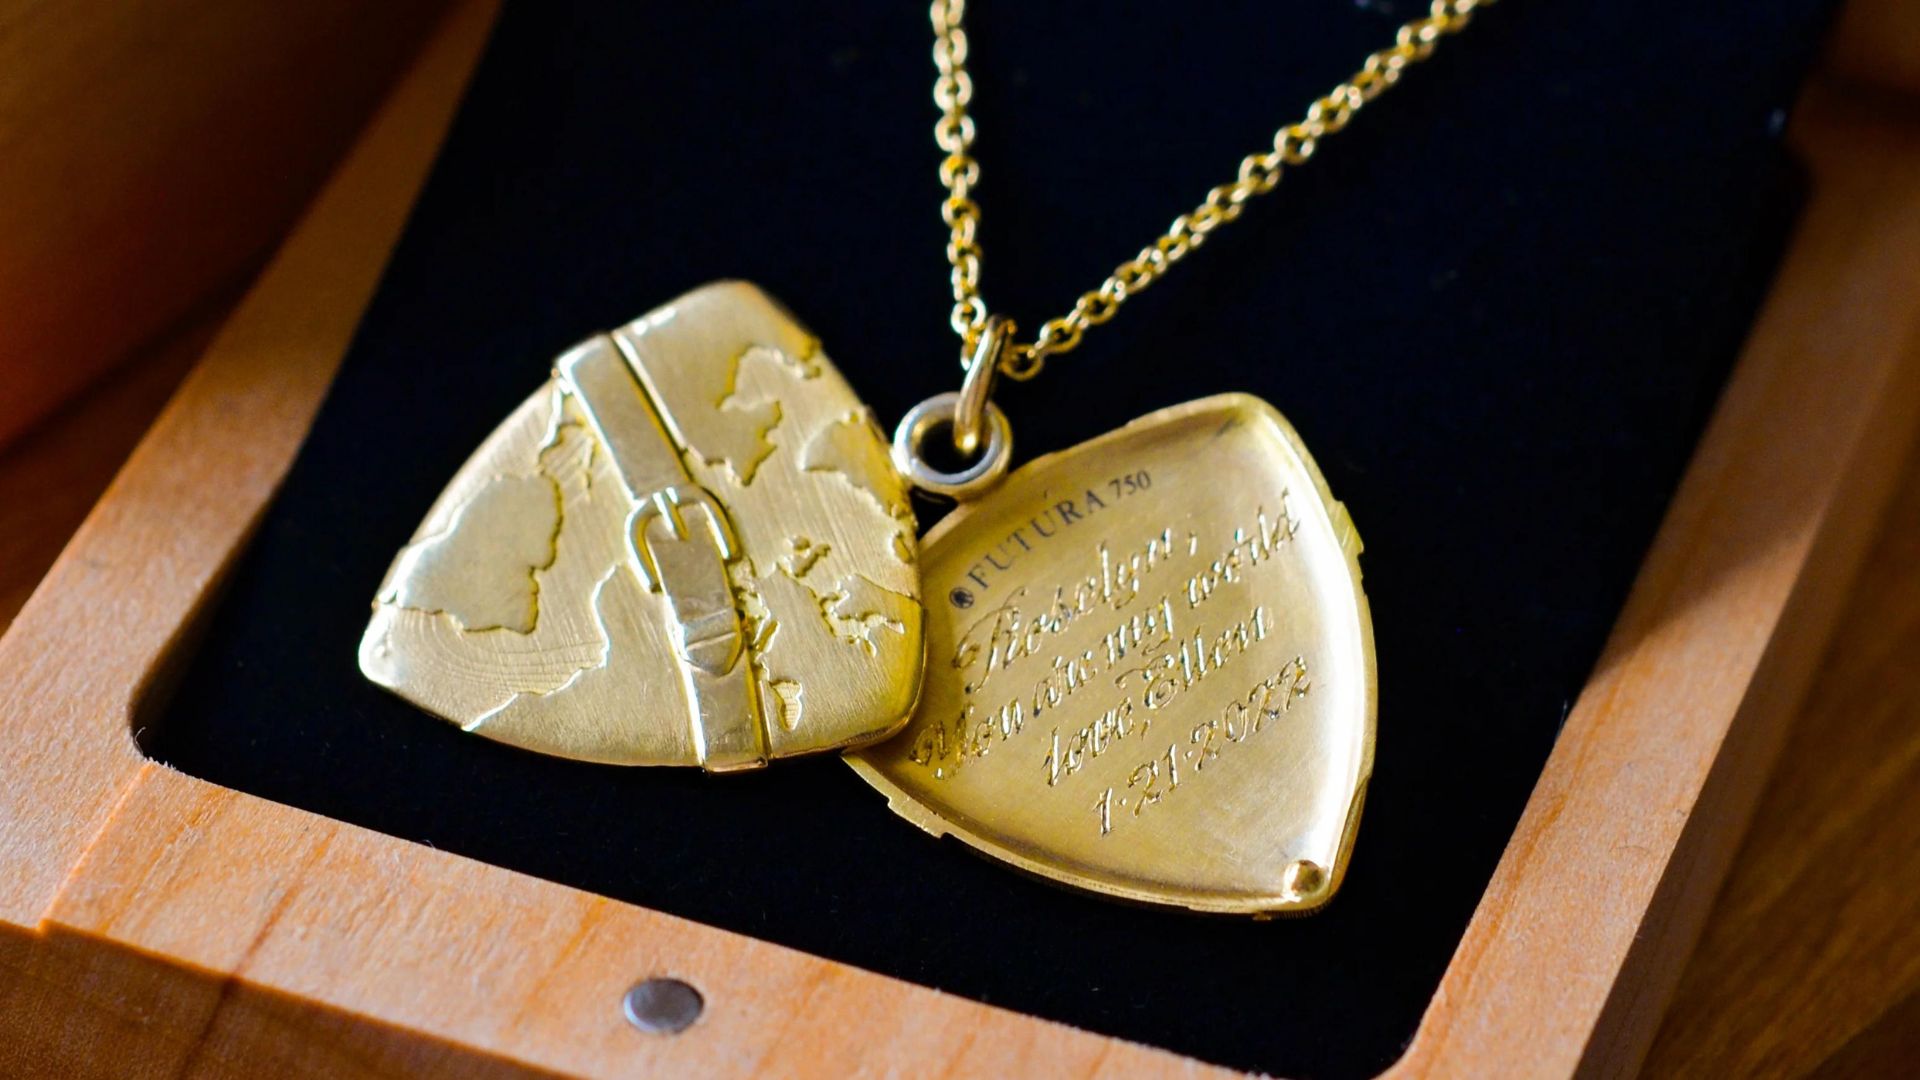 Crafting Memories - Gold Jewelry With Engraving Options